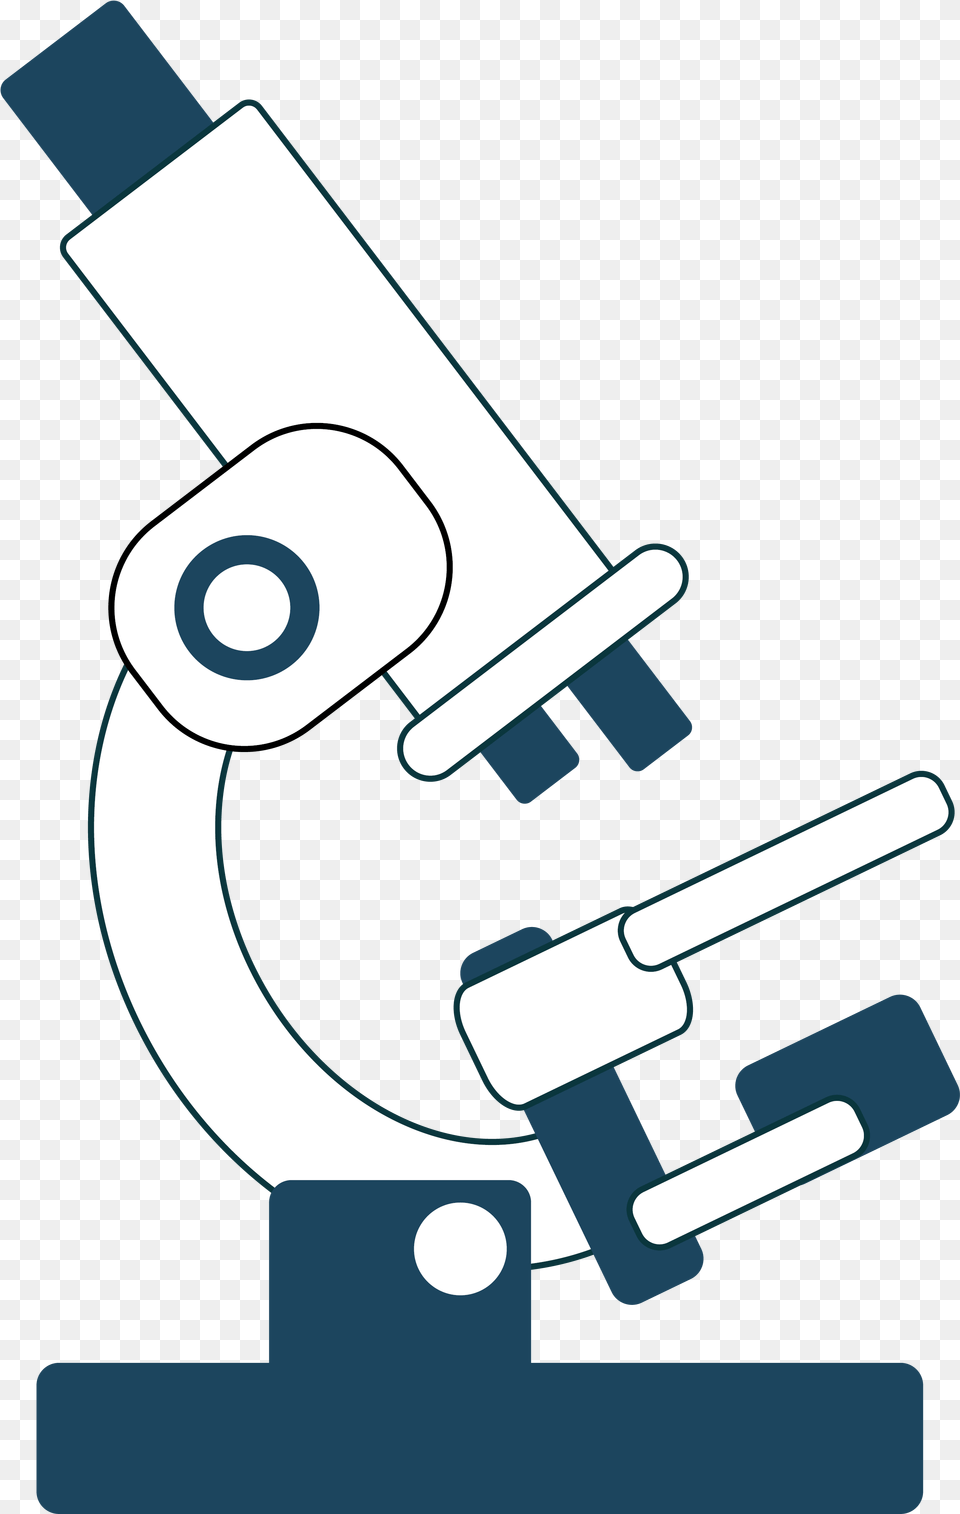 Diseases Such As Cancer Heart Disease Background Microscope Clip Art Free Png